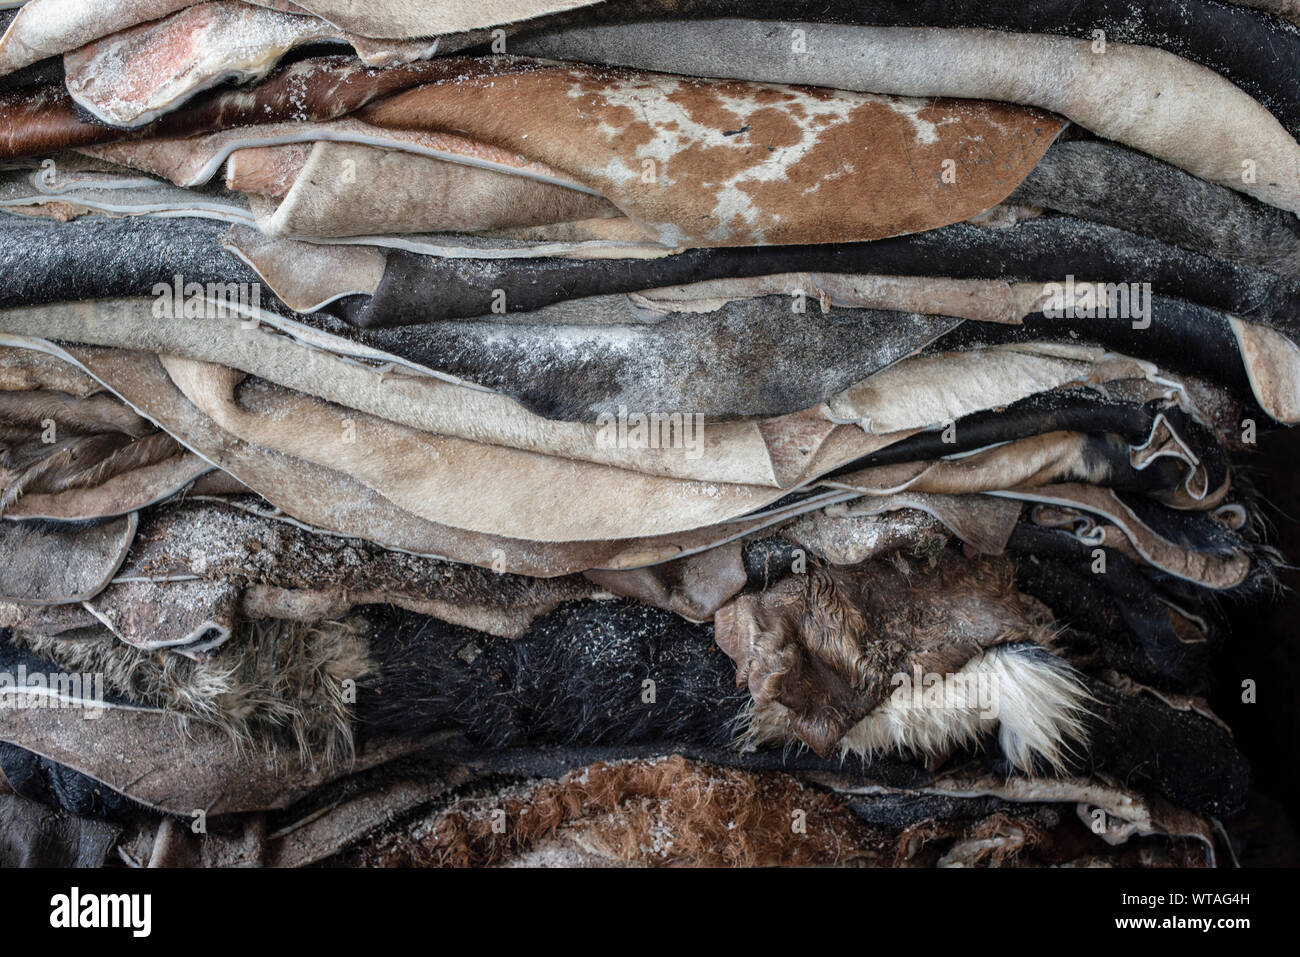 Pieces of raw leather stacked in tannery Stock Photo